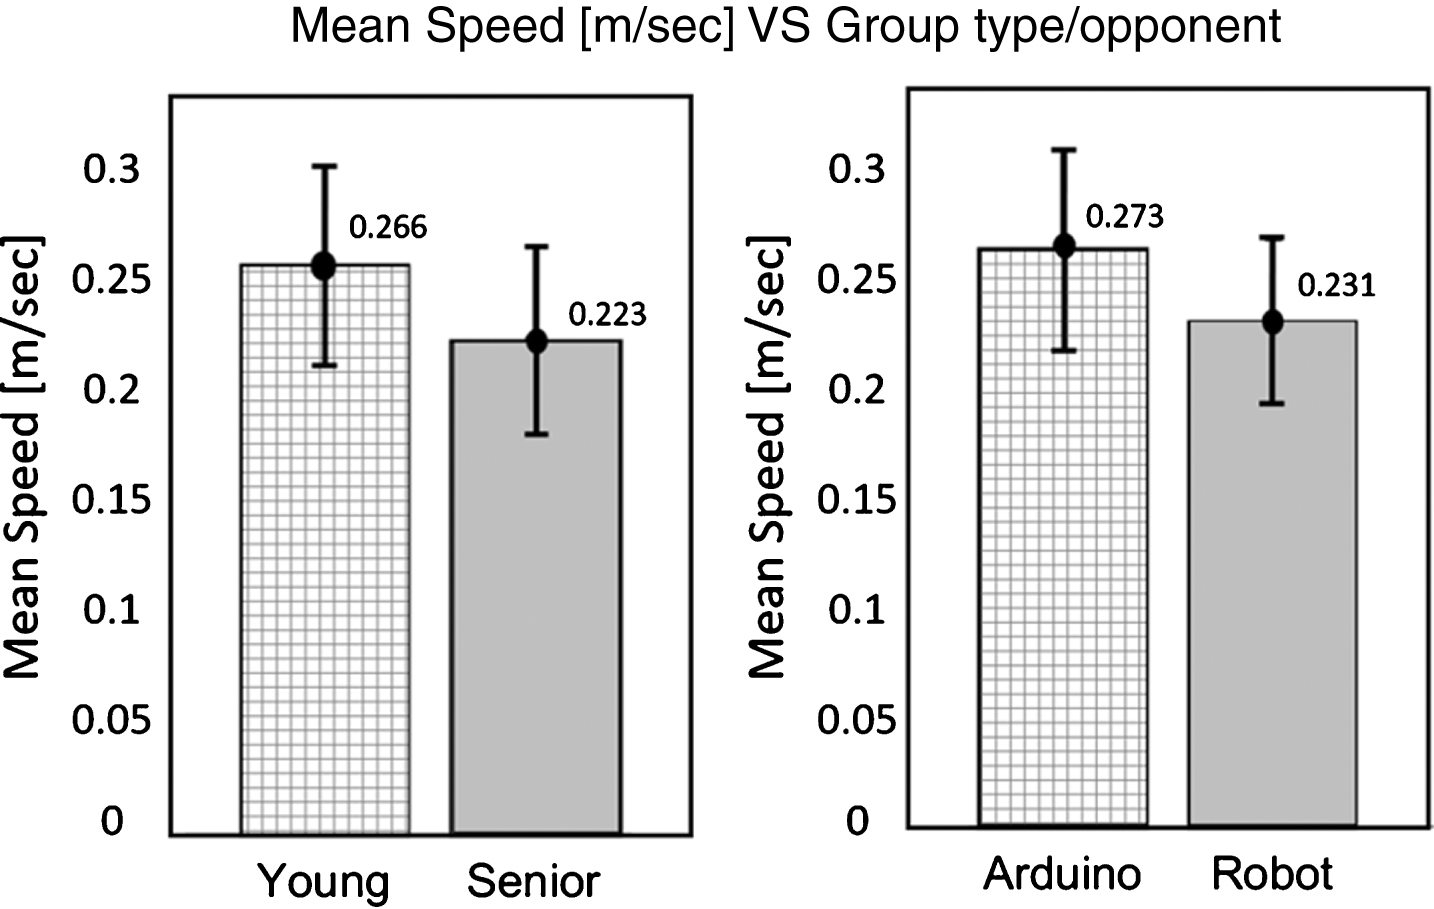 Average hand speed. Shown here per age group (left) and per system (right). Error bars denote standard error. An asterisk denotes a significant difference between the two groups or systems (p = 0.001).